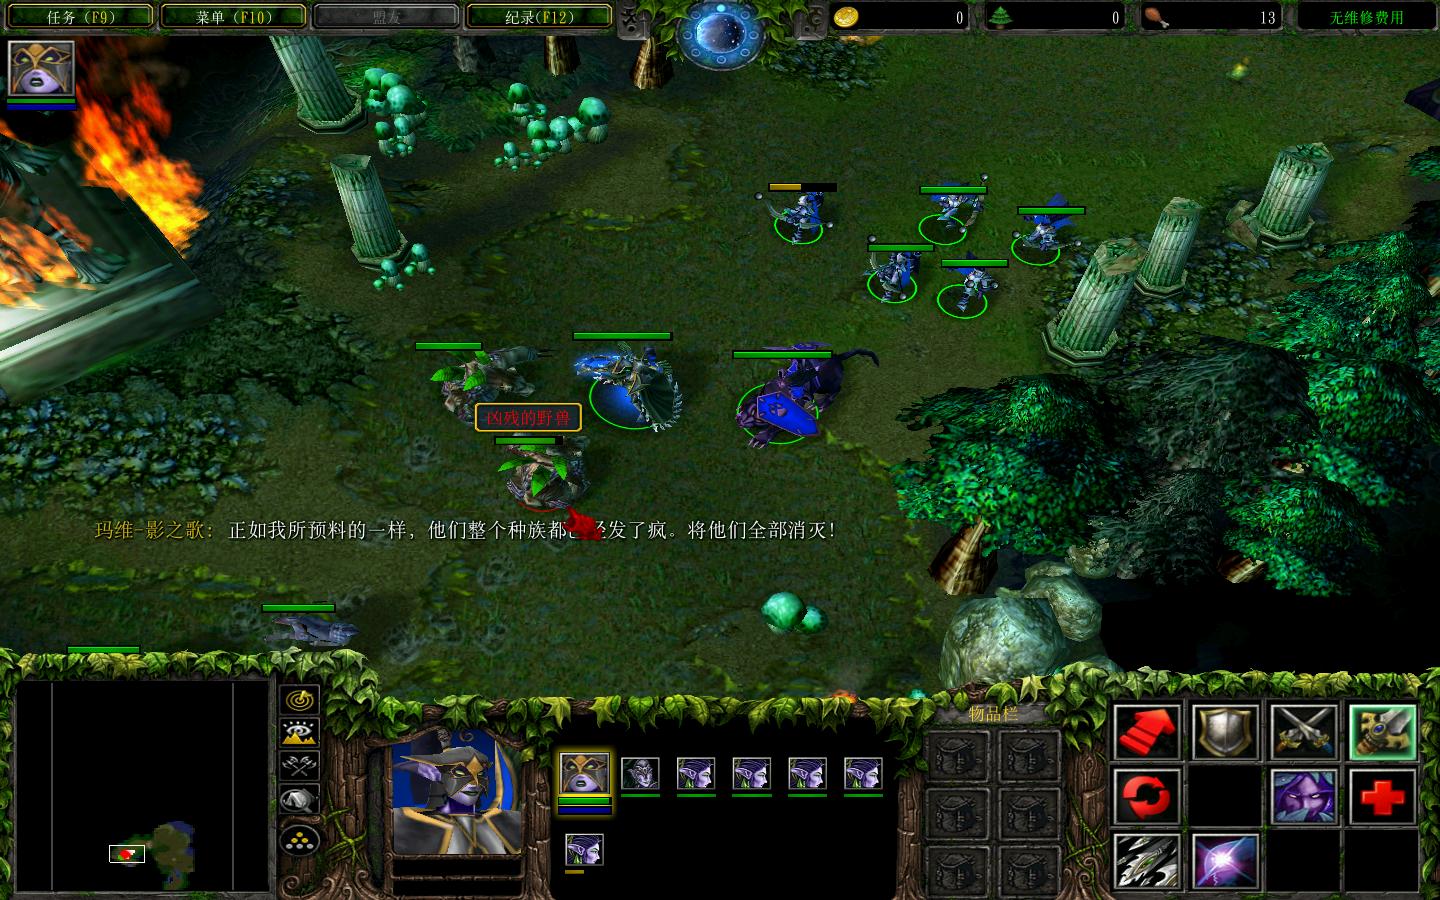 ħ3Warcraft III The Frozen Thronev1.24 v1.1.4